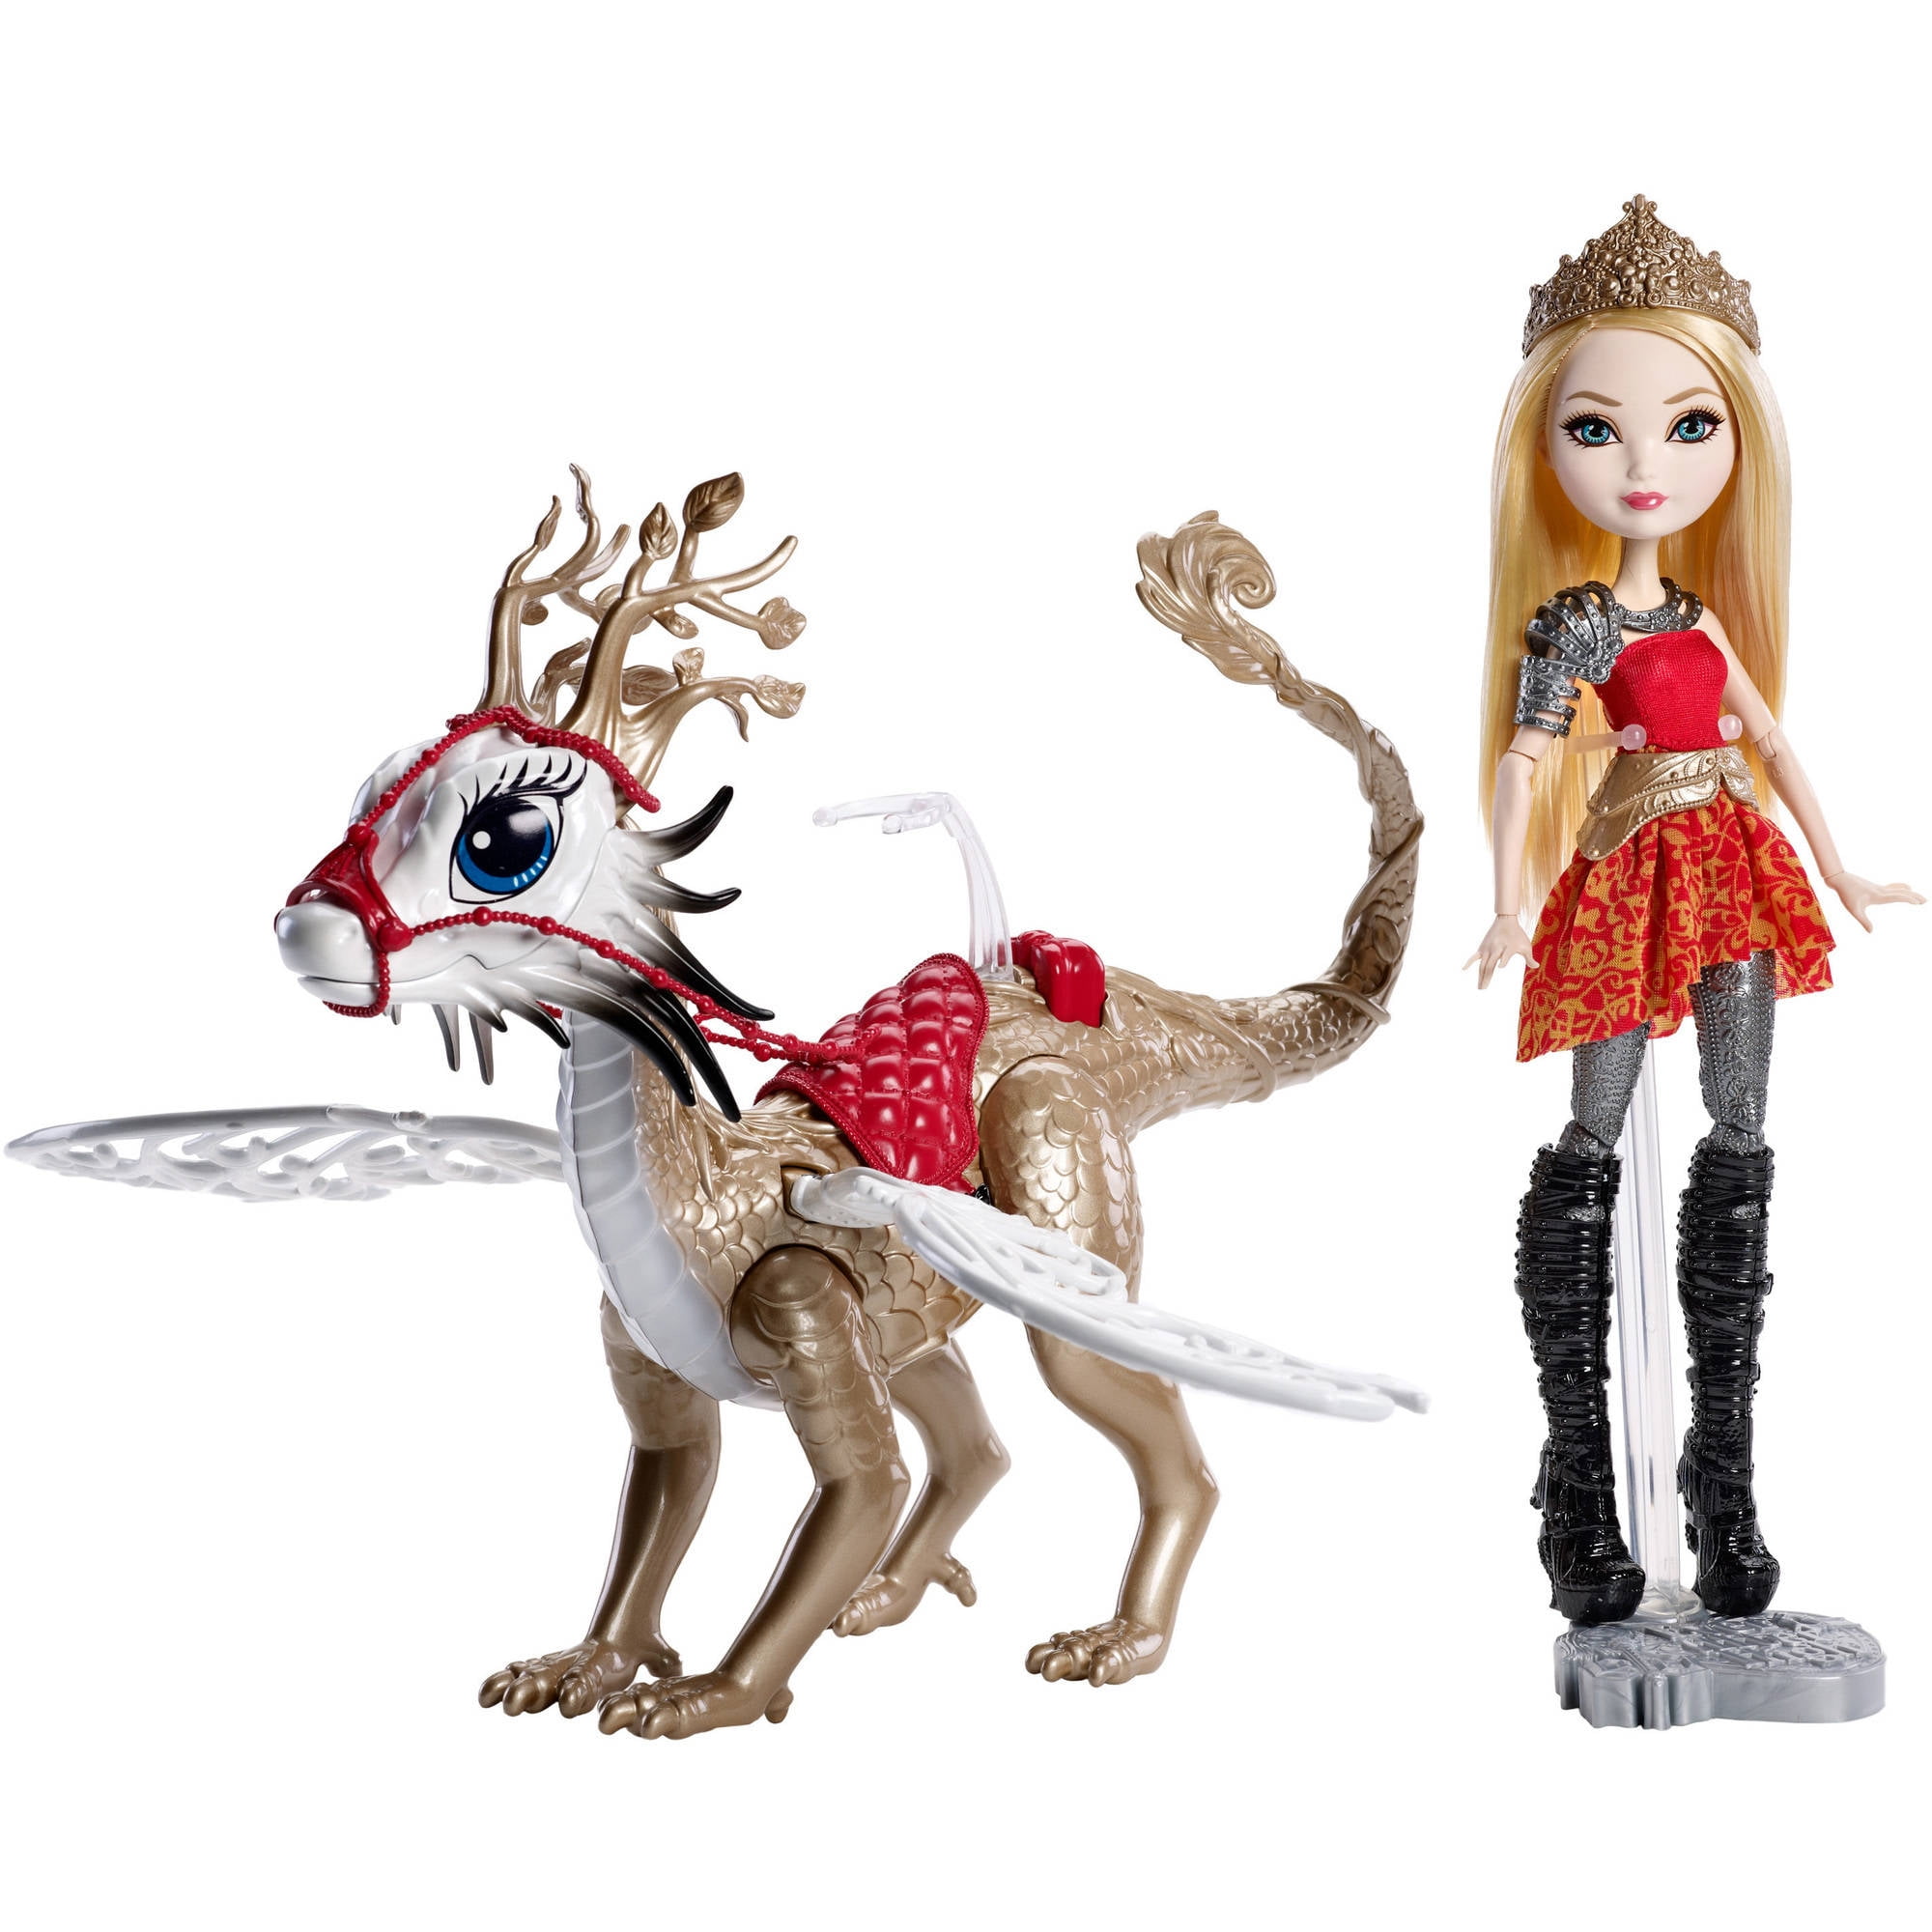 Ever after dolls, Ever after high, Apple white